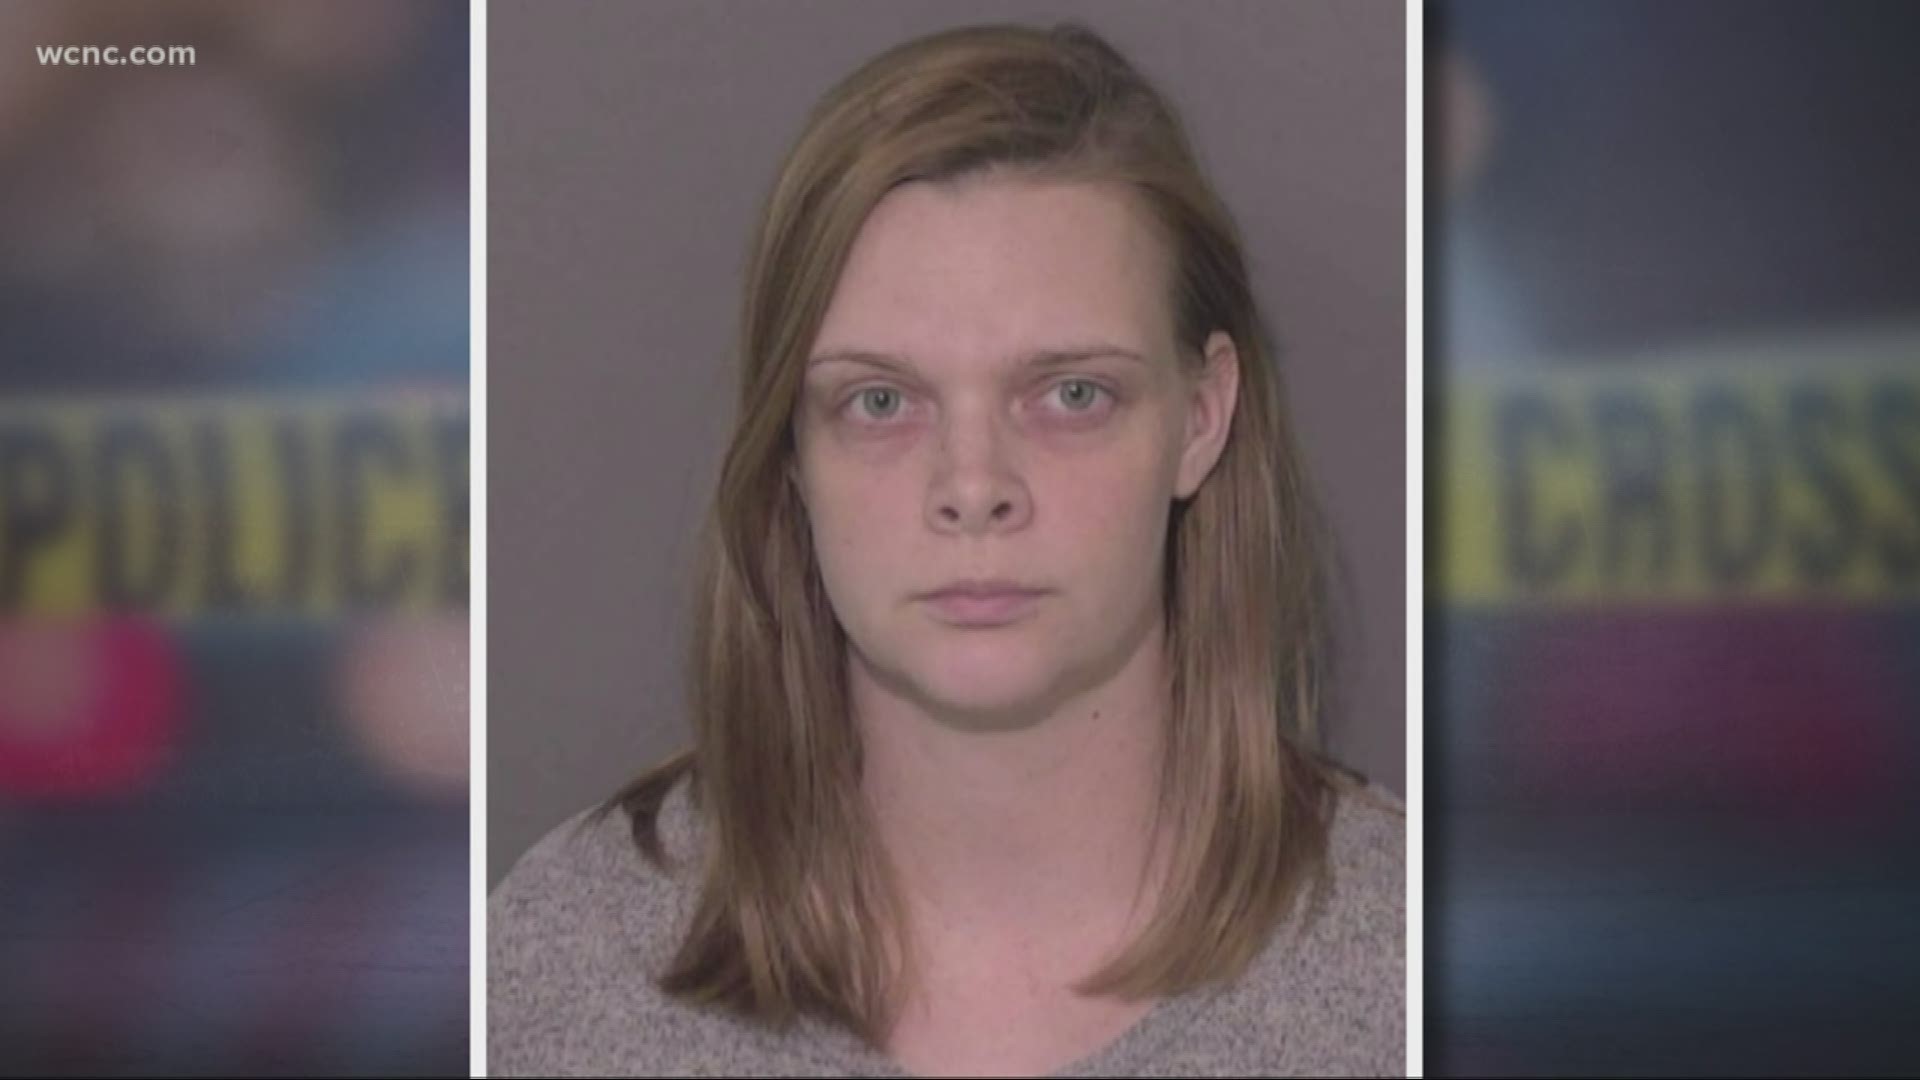 A Union County mother accused of killing her newborn baby is scheduled to face a judge Monday. She could spend the rest of her life behind bars.